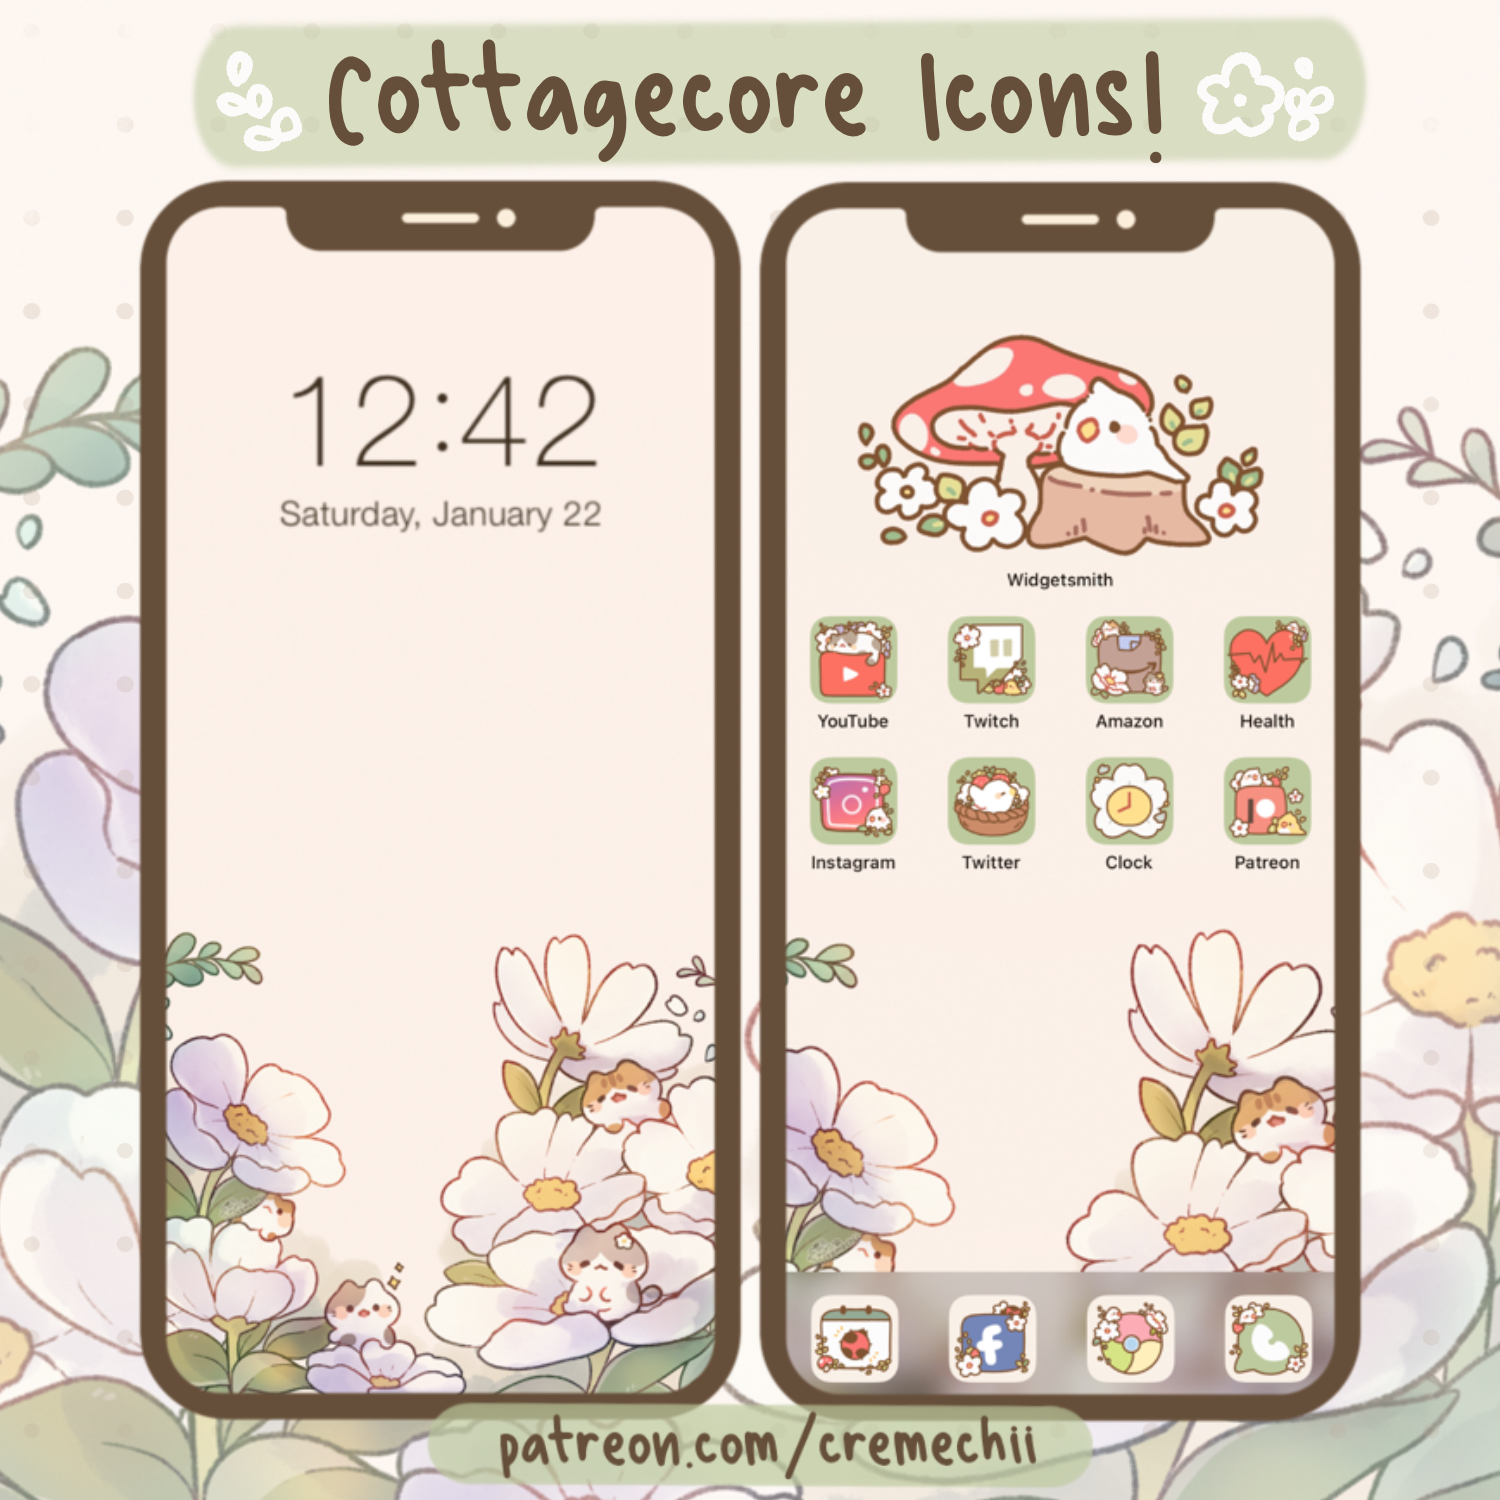 Kawaii Aesthetic iPhone Icon Set With Widgets and Wallpapers 